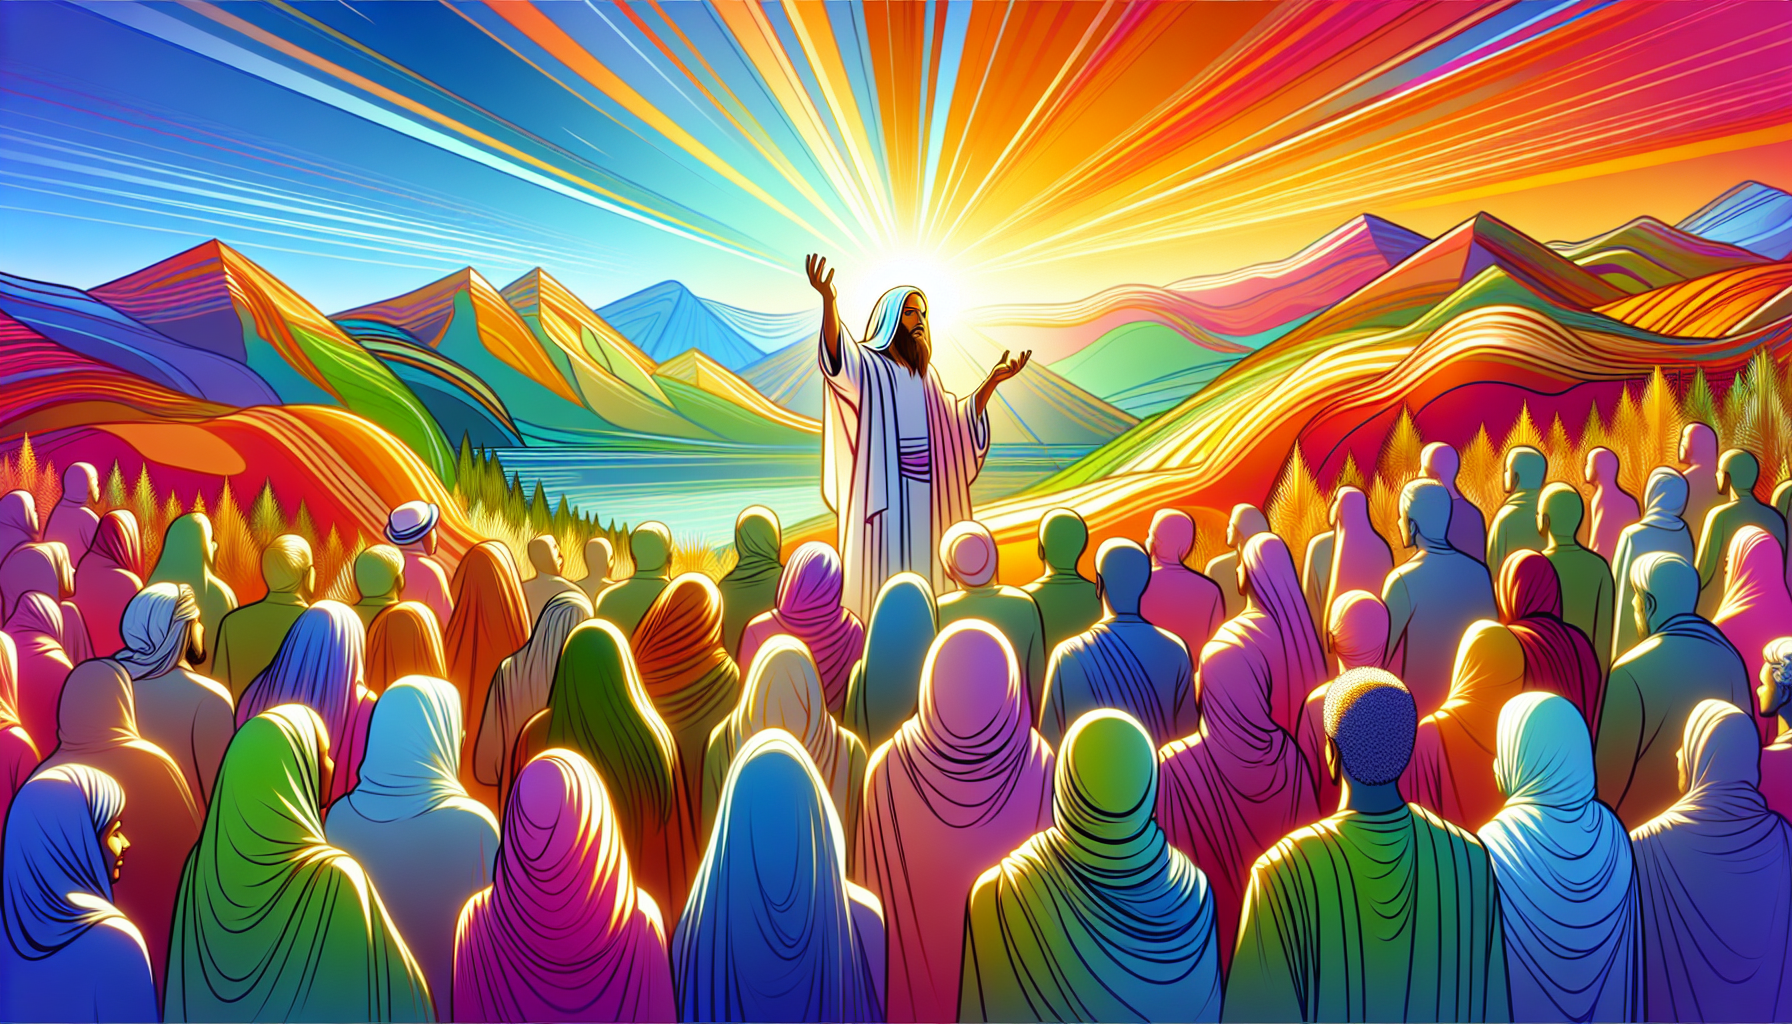 a serene landscape depicting Jesus giving a sermon on a mountaintop, with a diverse group of people listening attentively, radiant sunlight casting soft glows and the surrounding nature in vibrant col